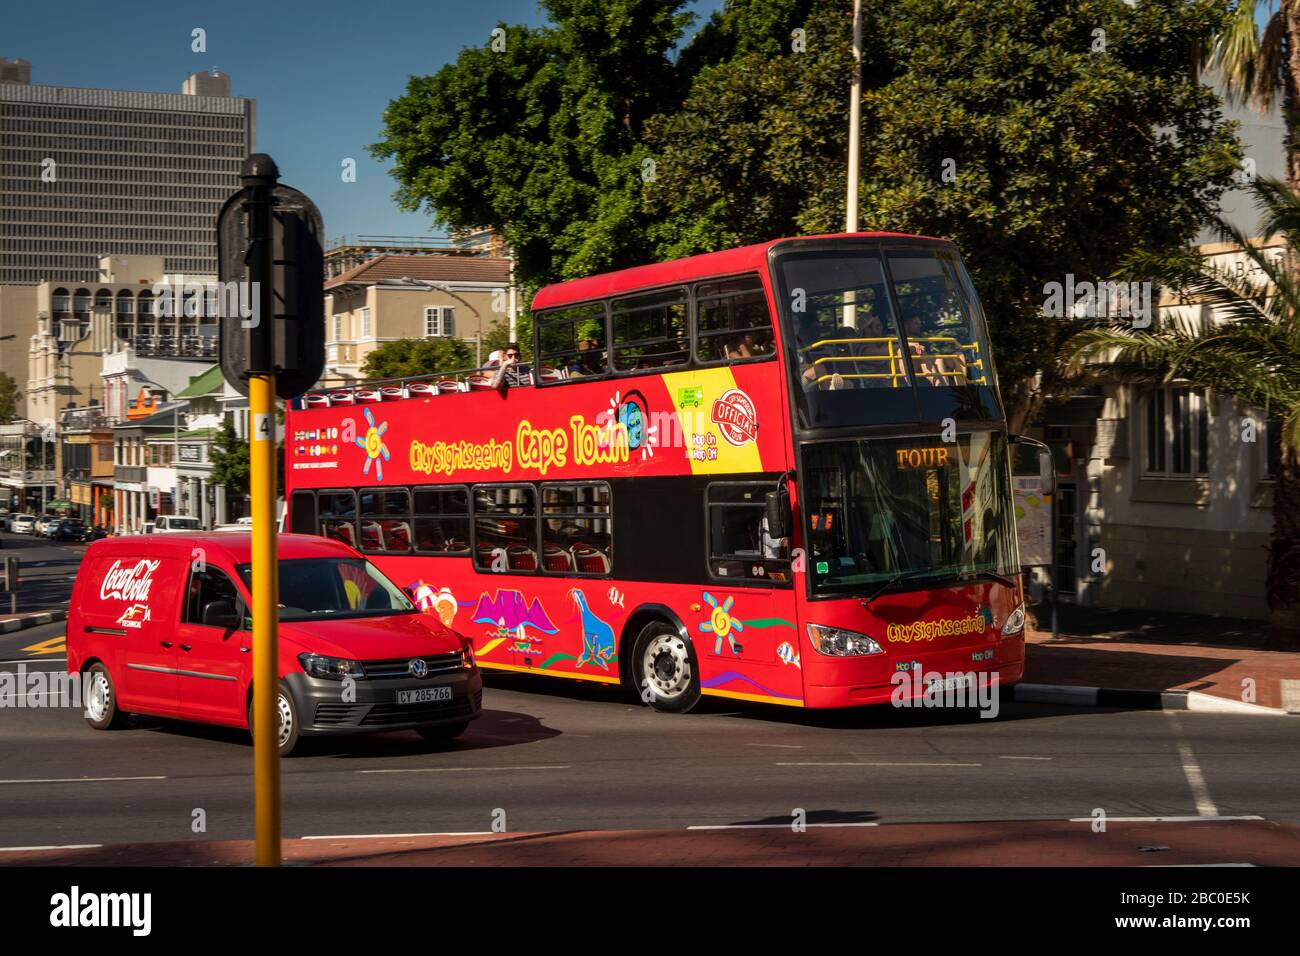 South Africa, Cape Town, Bree Street, Red City Sightseeing open topped hop on, hop, off, tour bus at road junction Stock Photo